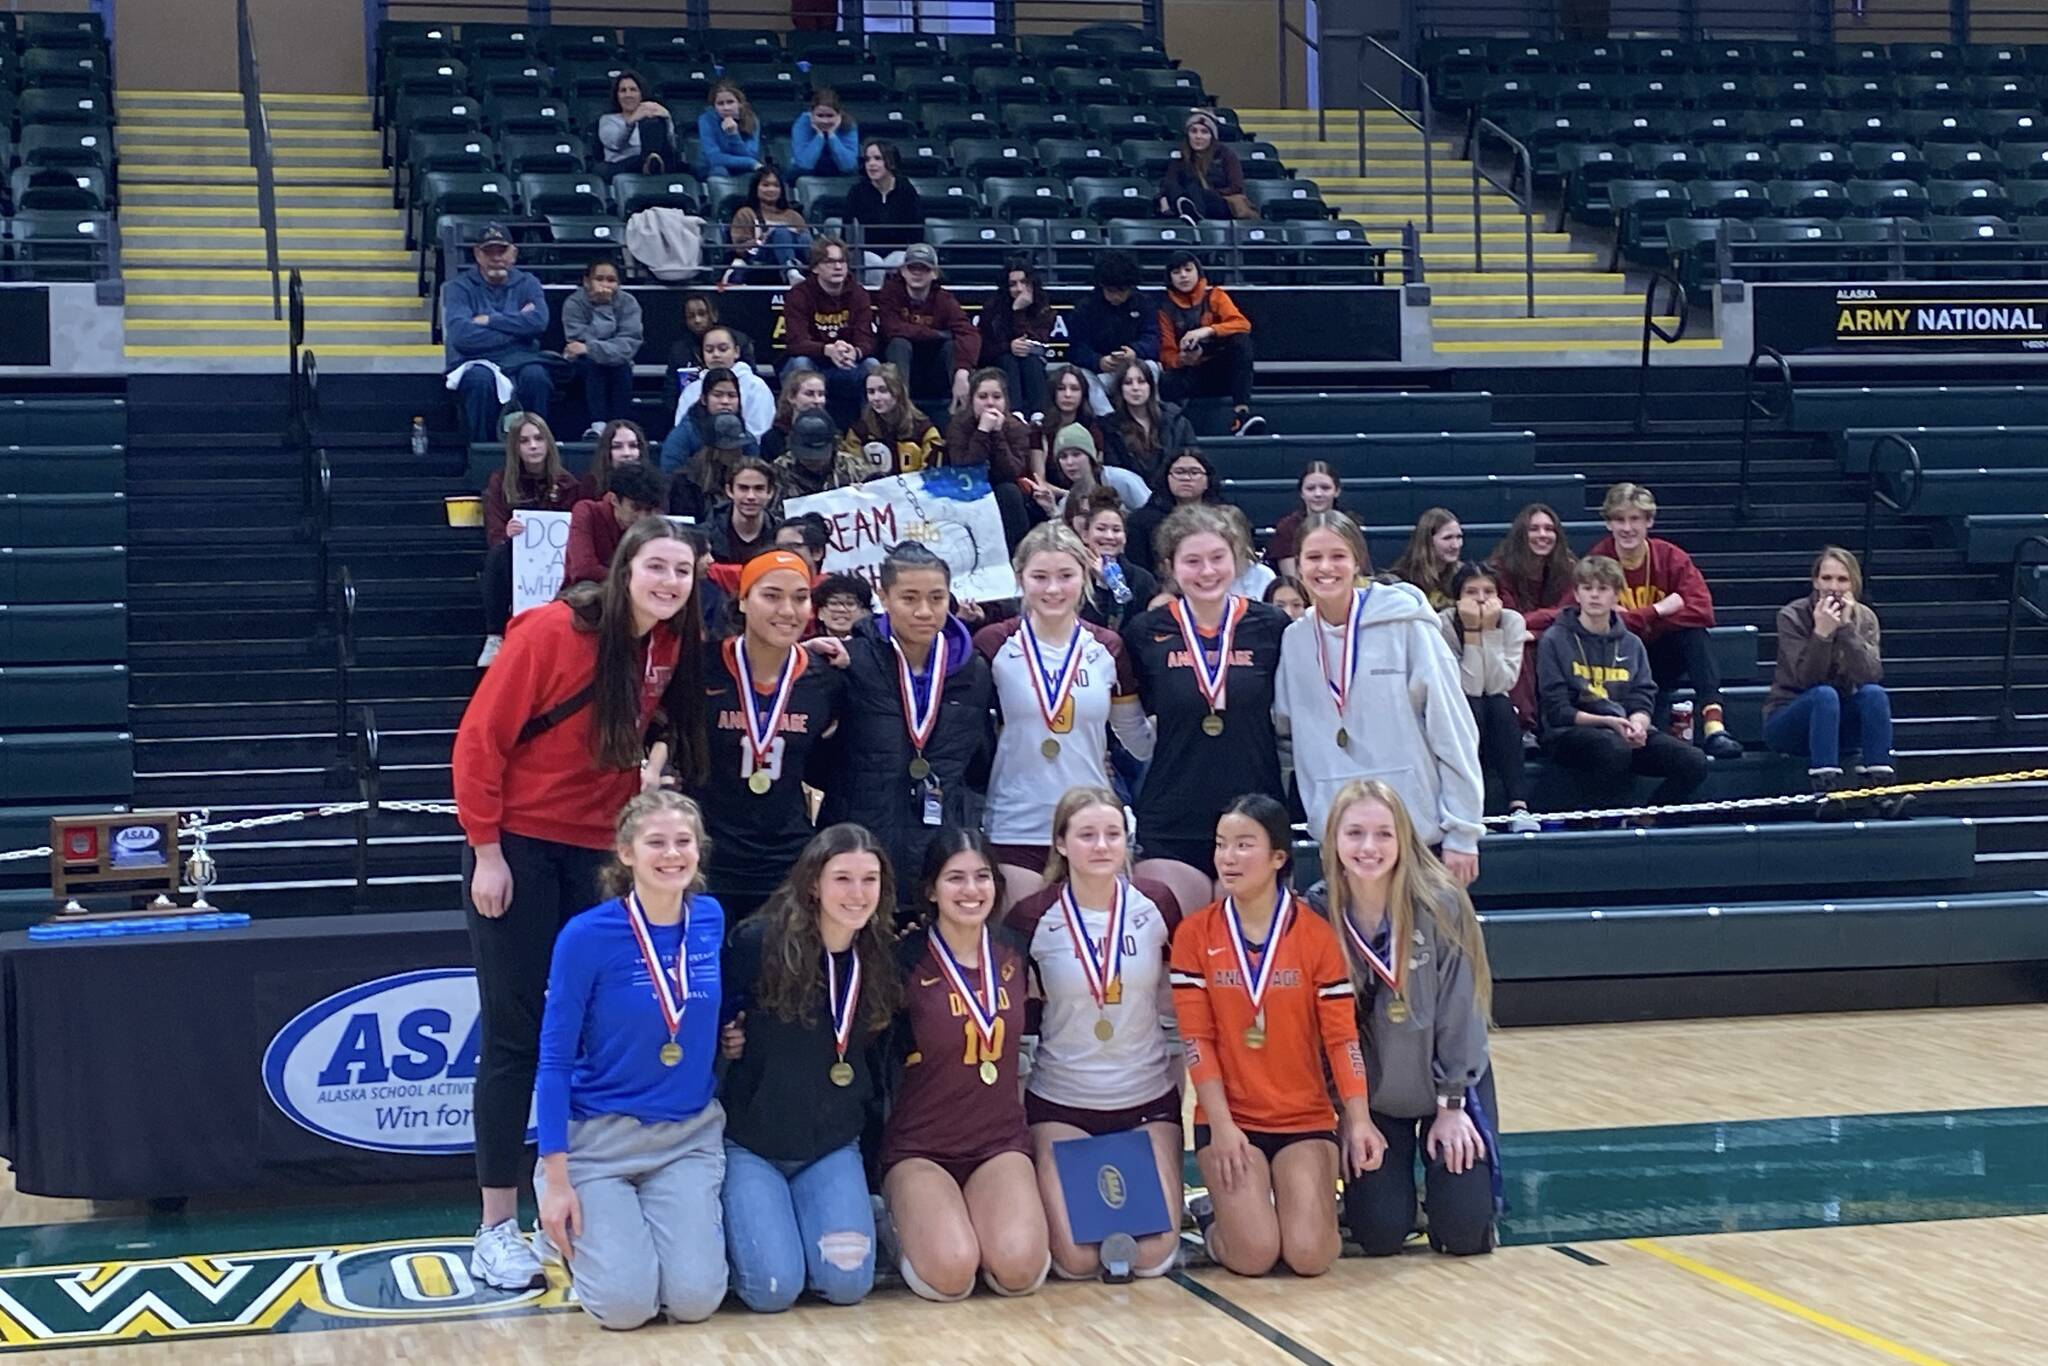 TMHS senior Mallory Welling was selected among 11 other volleyball players from within Alaska to be on the All Tournament Team during the 2022 3A/4A Volleyball State Championships in Anchorage. (Courtesy Photo / Julie Herman)